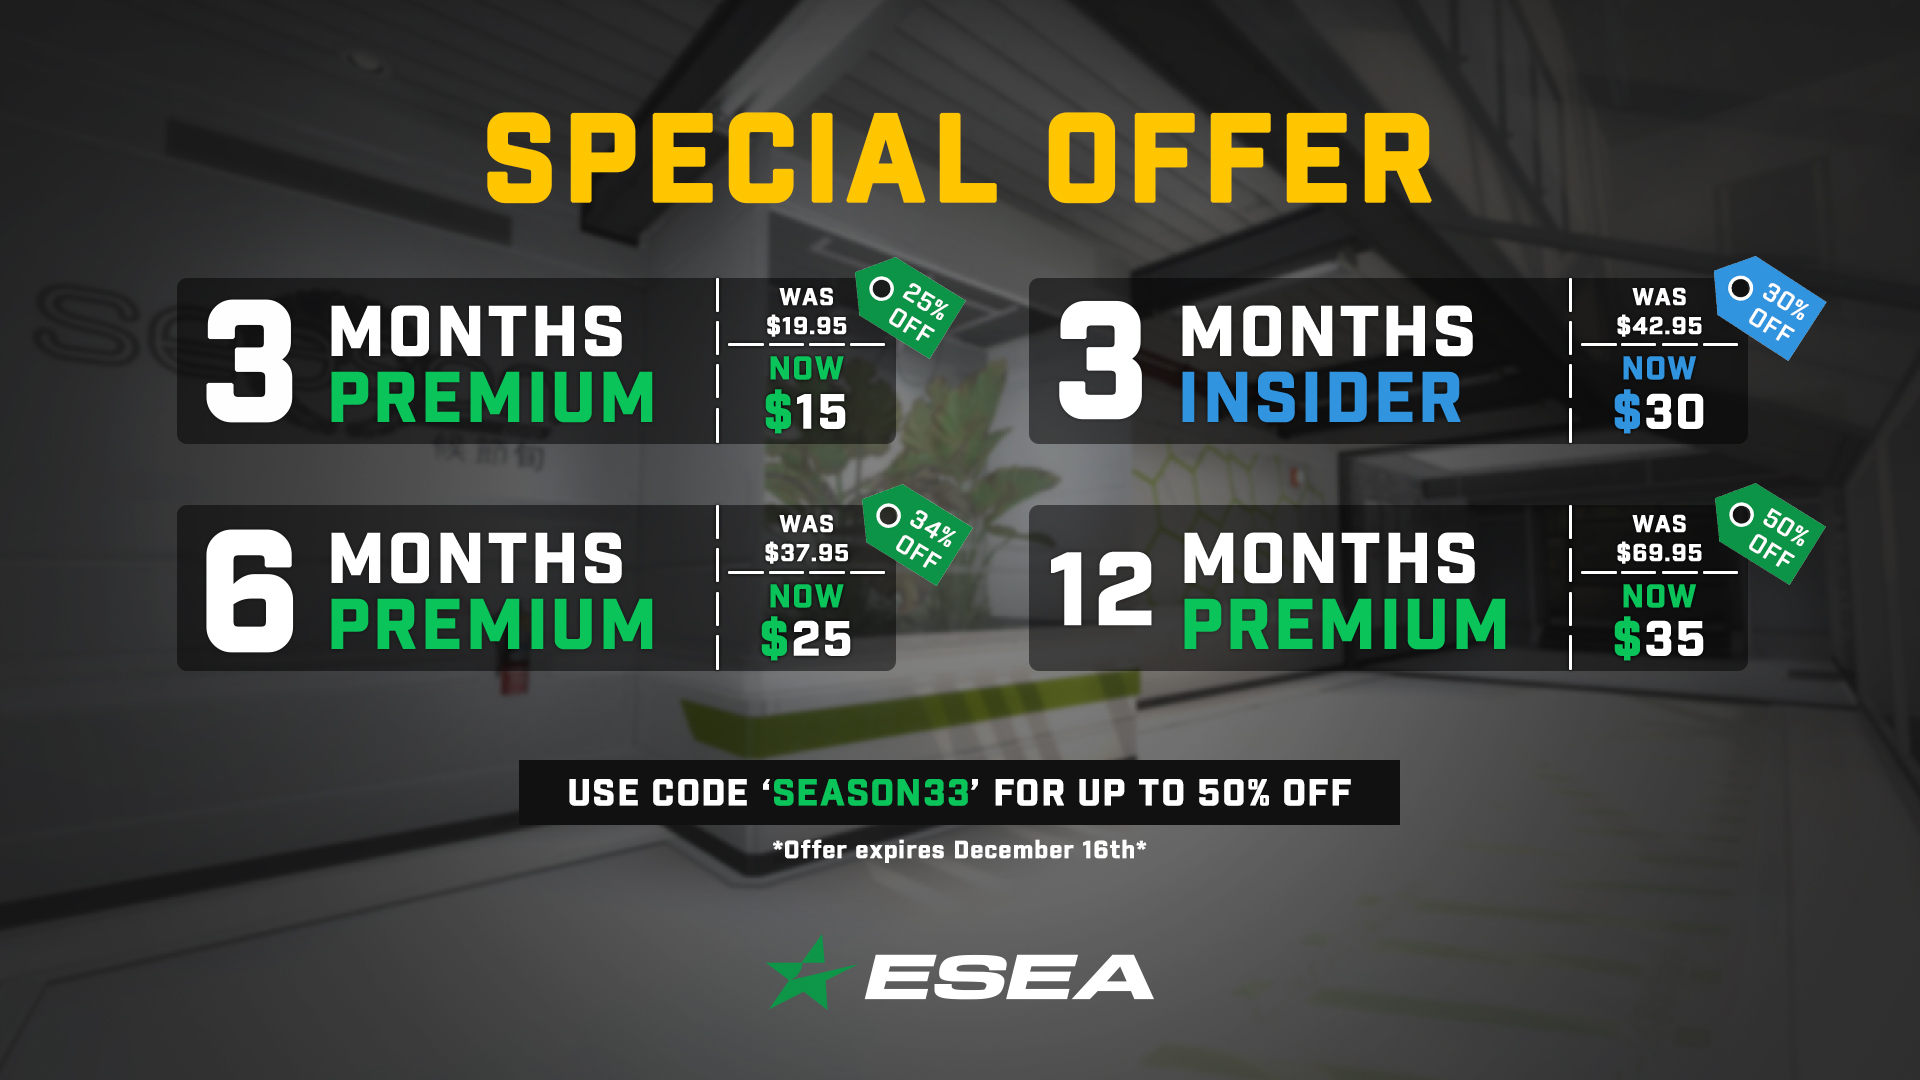 ESEA Free-to-Play during EPL S10 Finals!